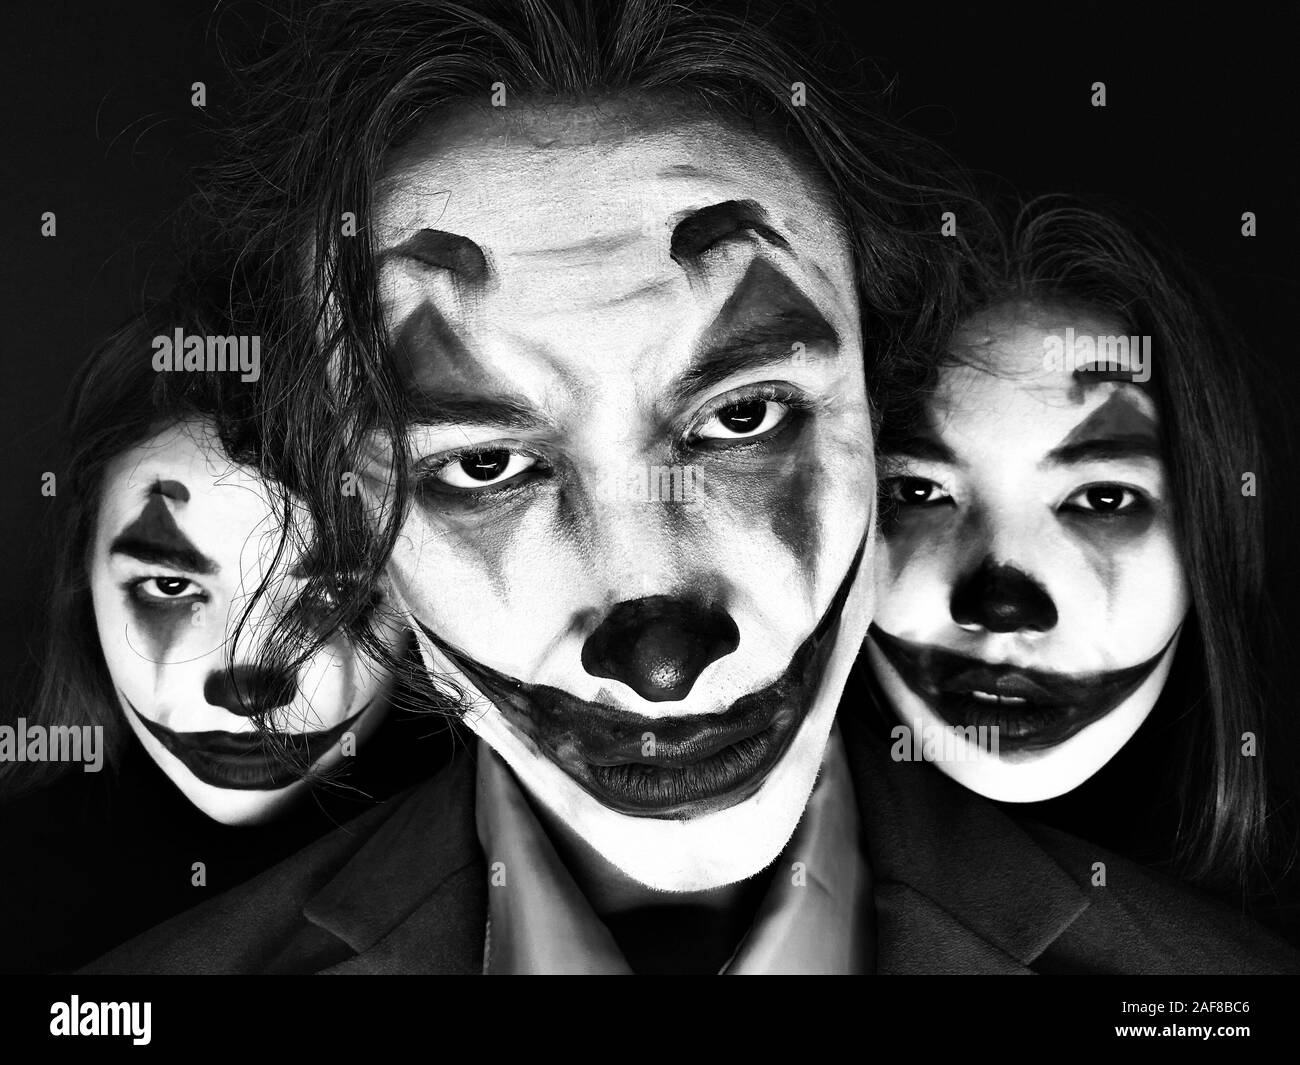 Portrait of three people with clown makeup on a black background. Stock Photo